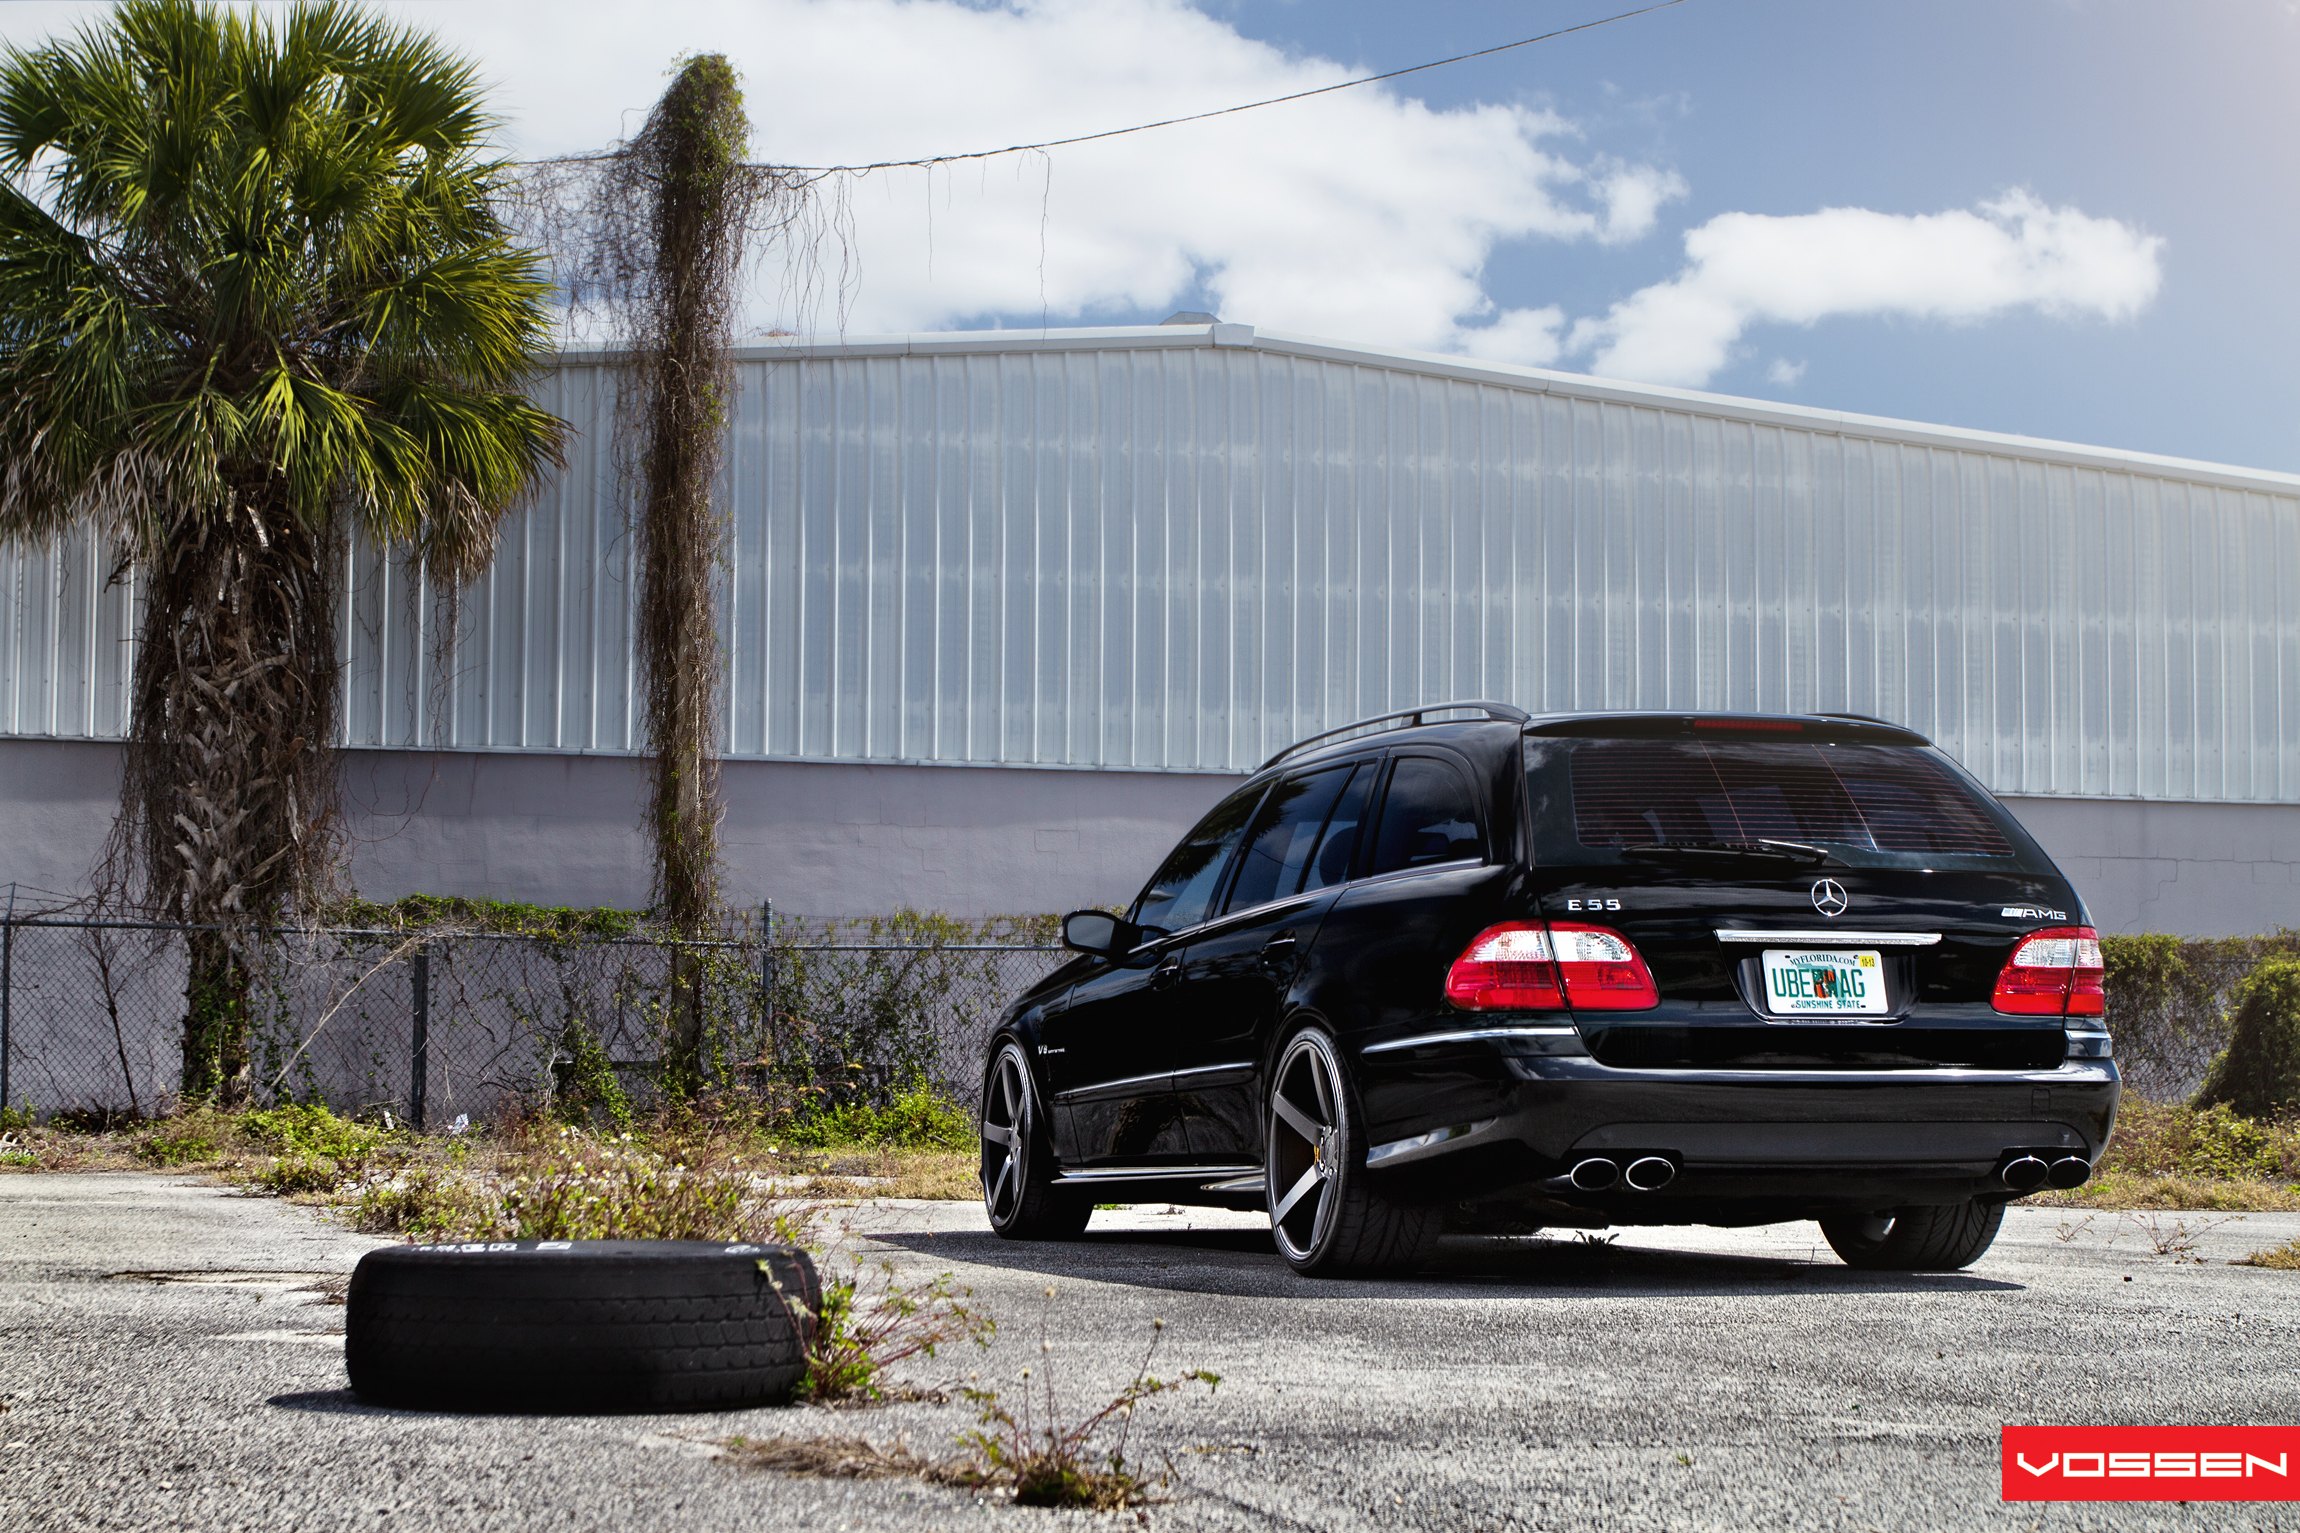 Aftermarket LED Taillights on Black Mercedes E Class - Photo by Vossen